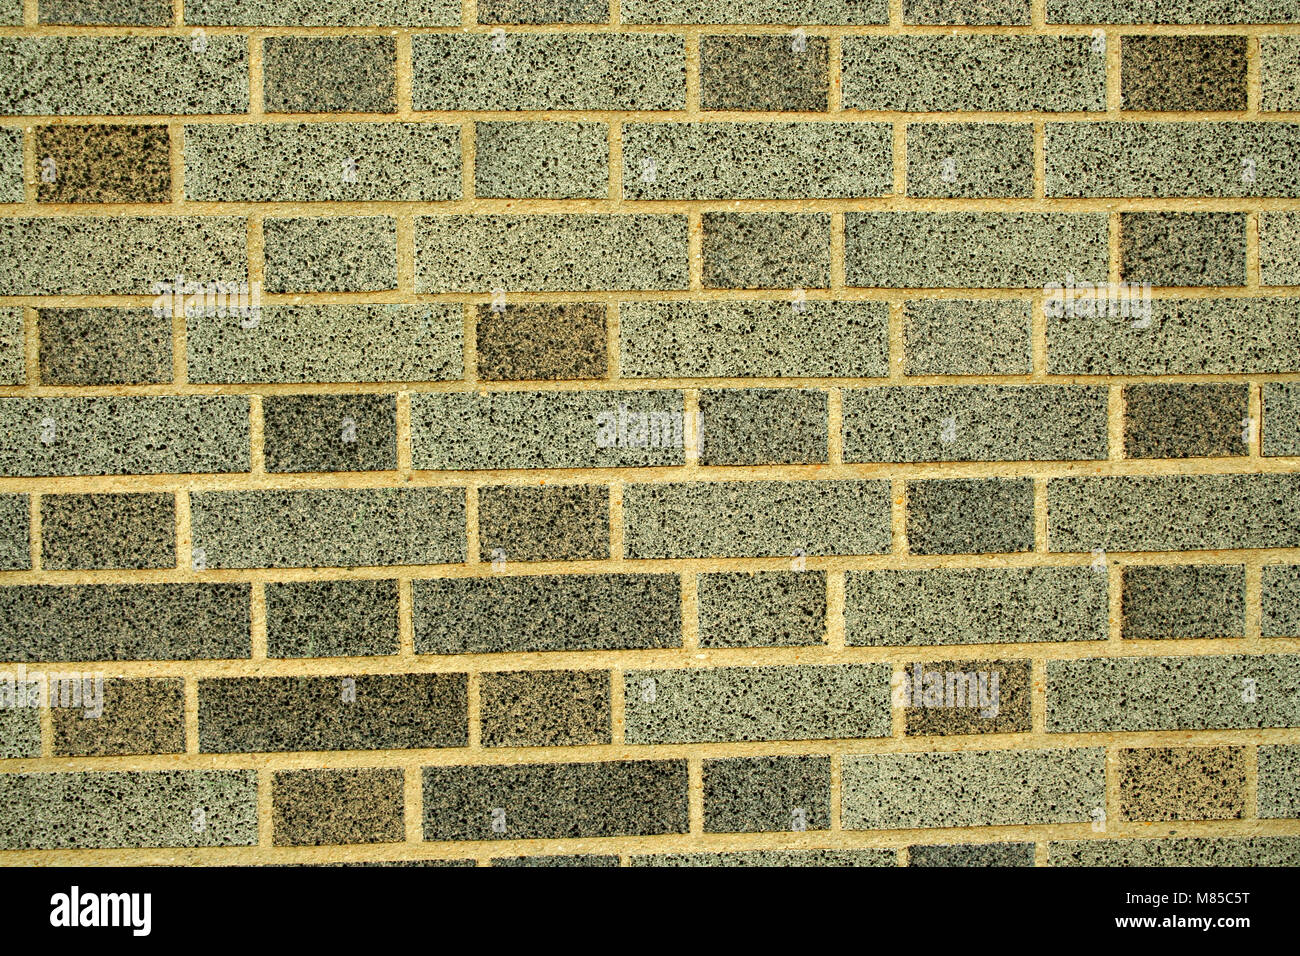 A Brickwall texture background Stock Photo